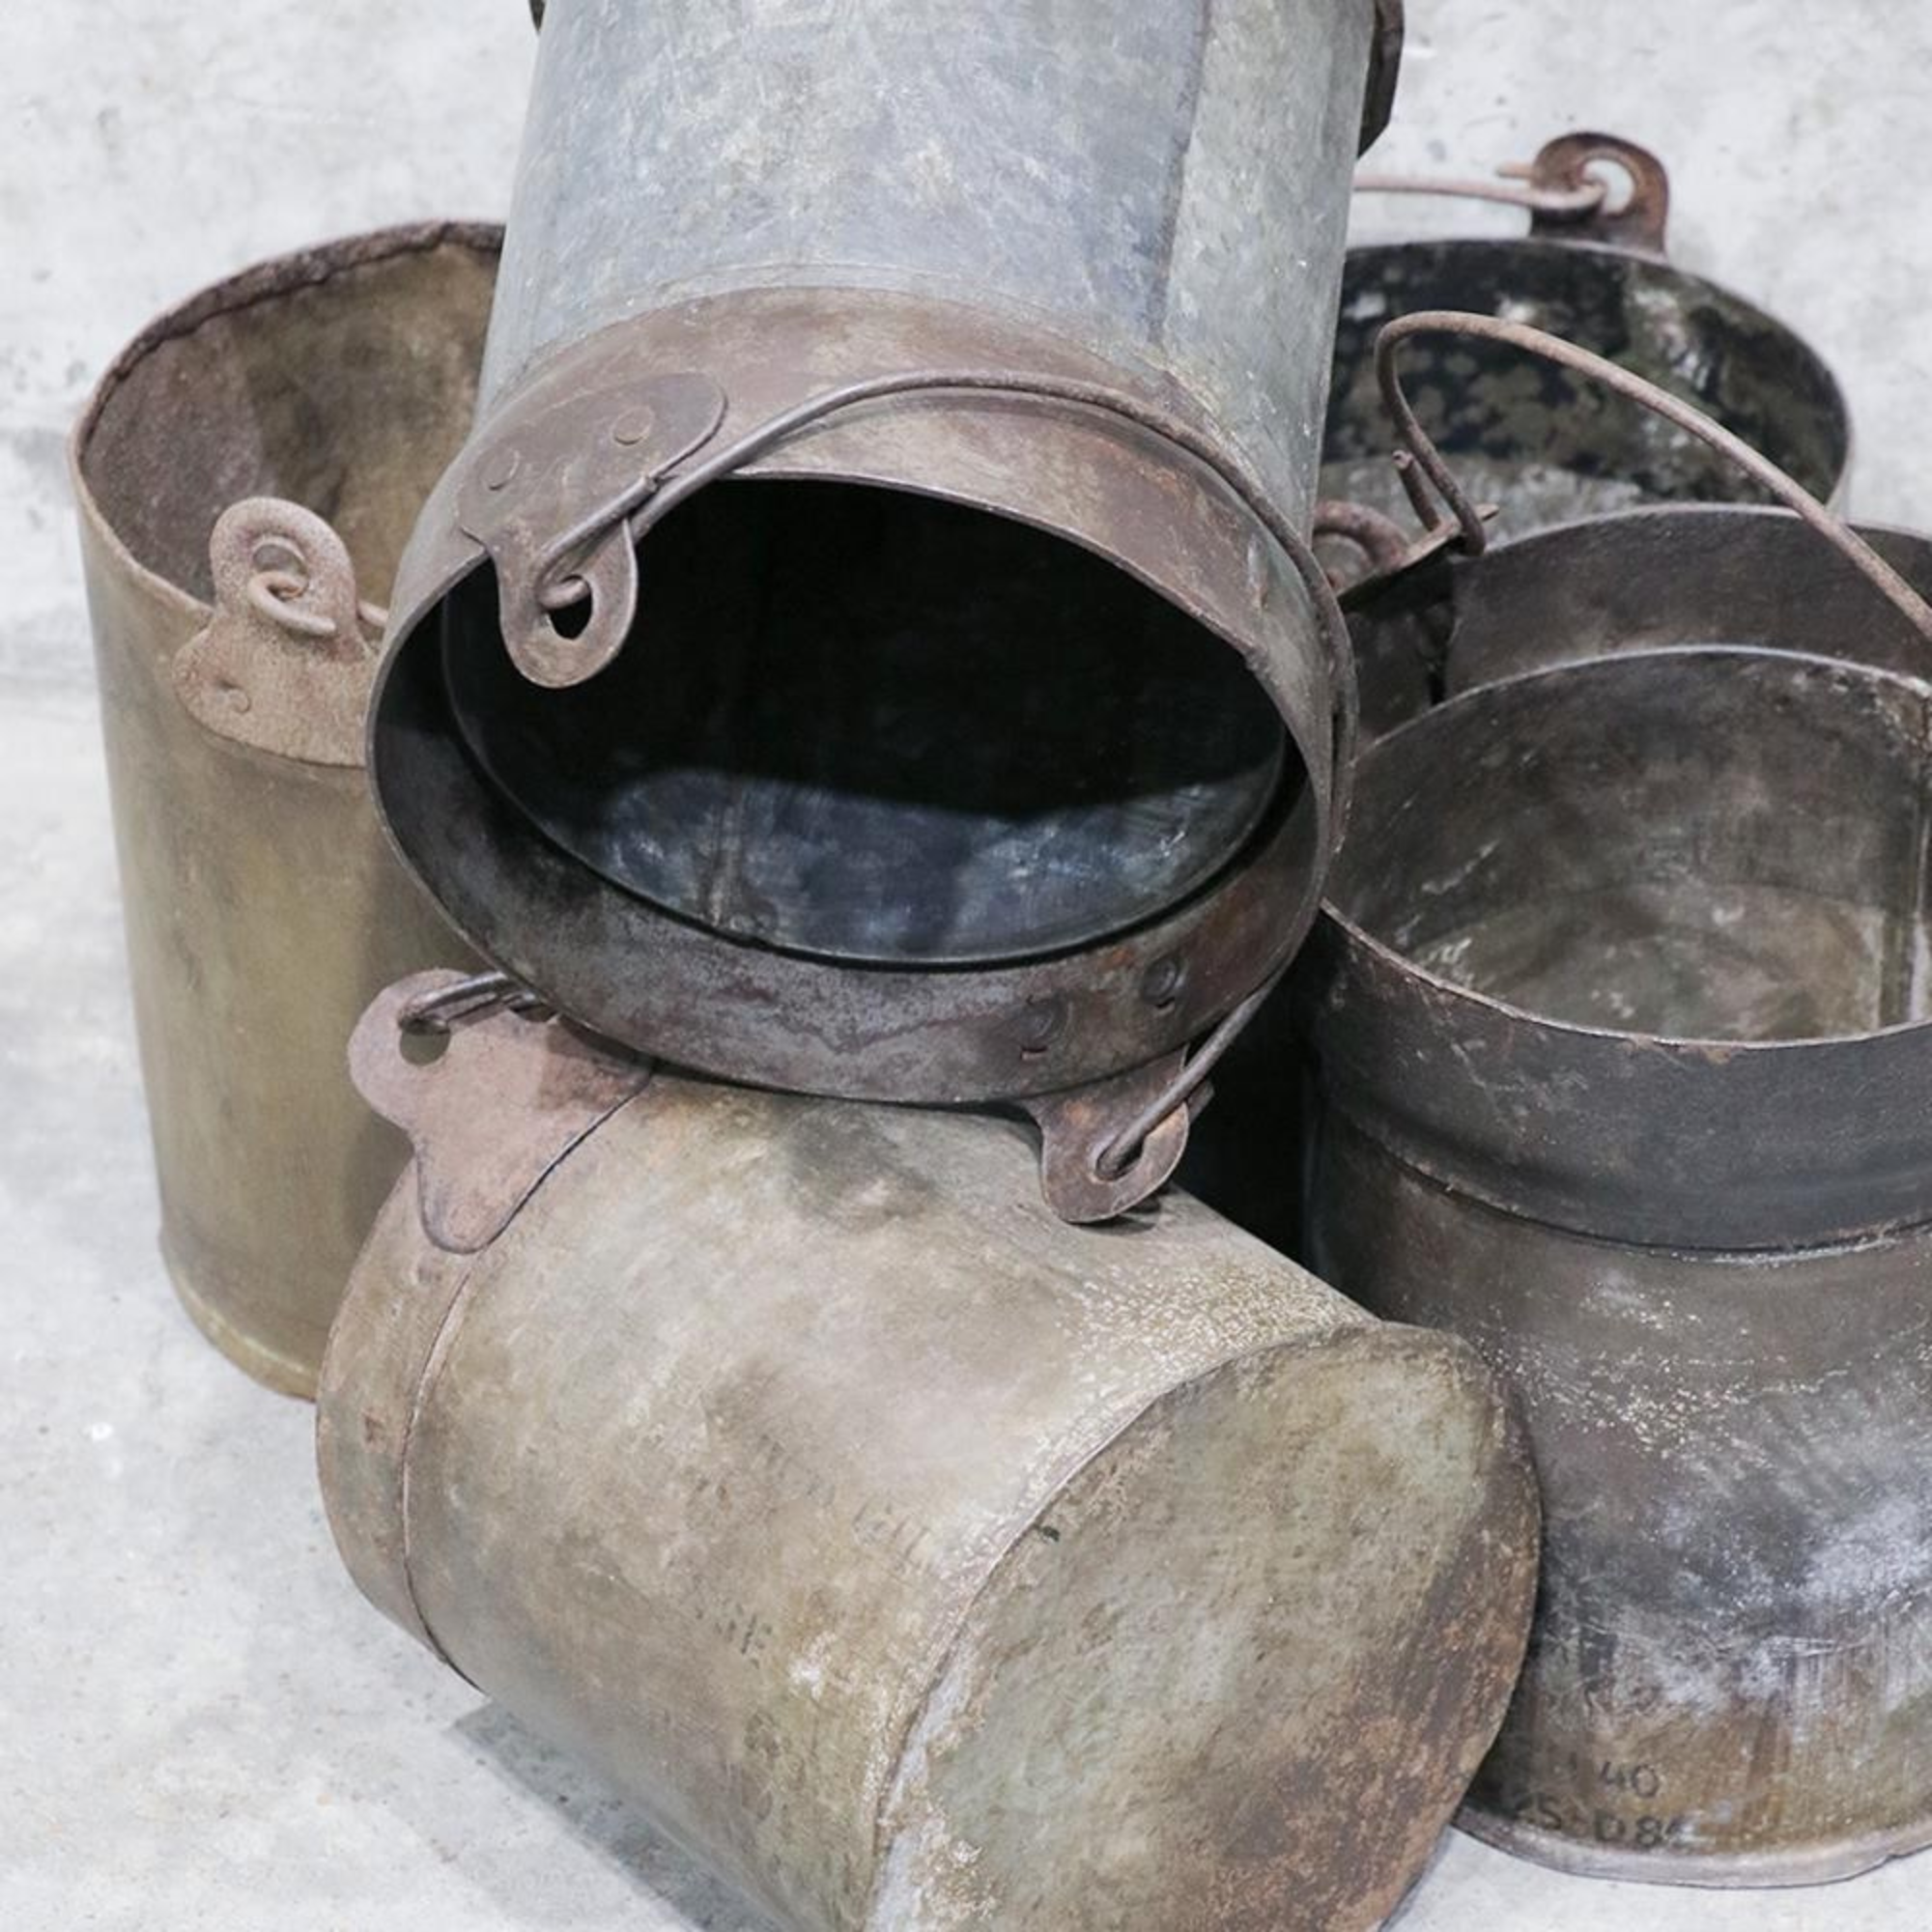 ORIGINAL PAIL | MADE FROM BOMB CASINGS